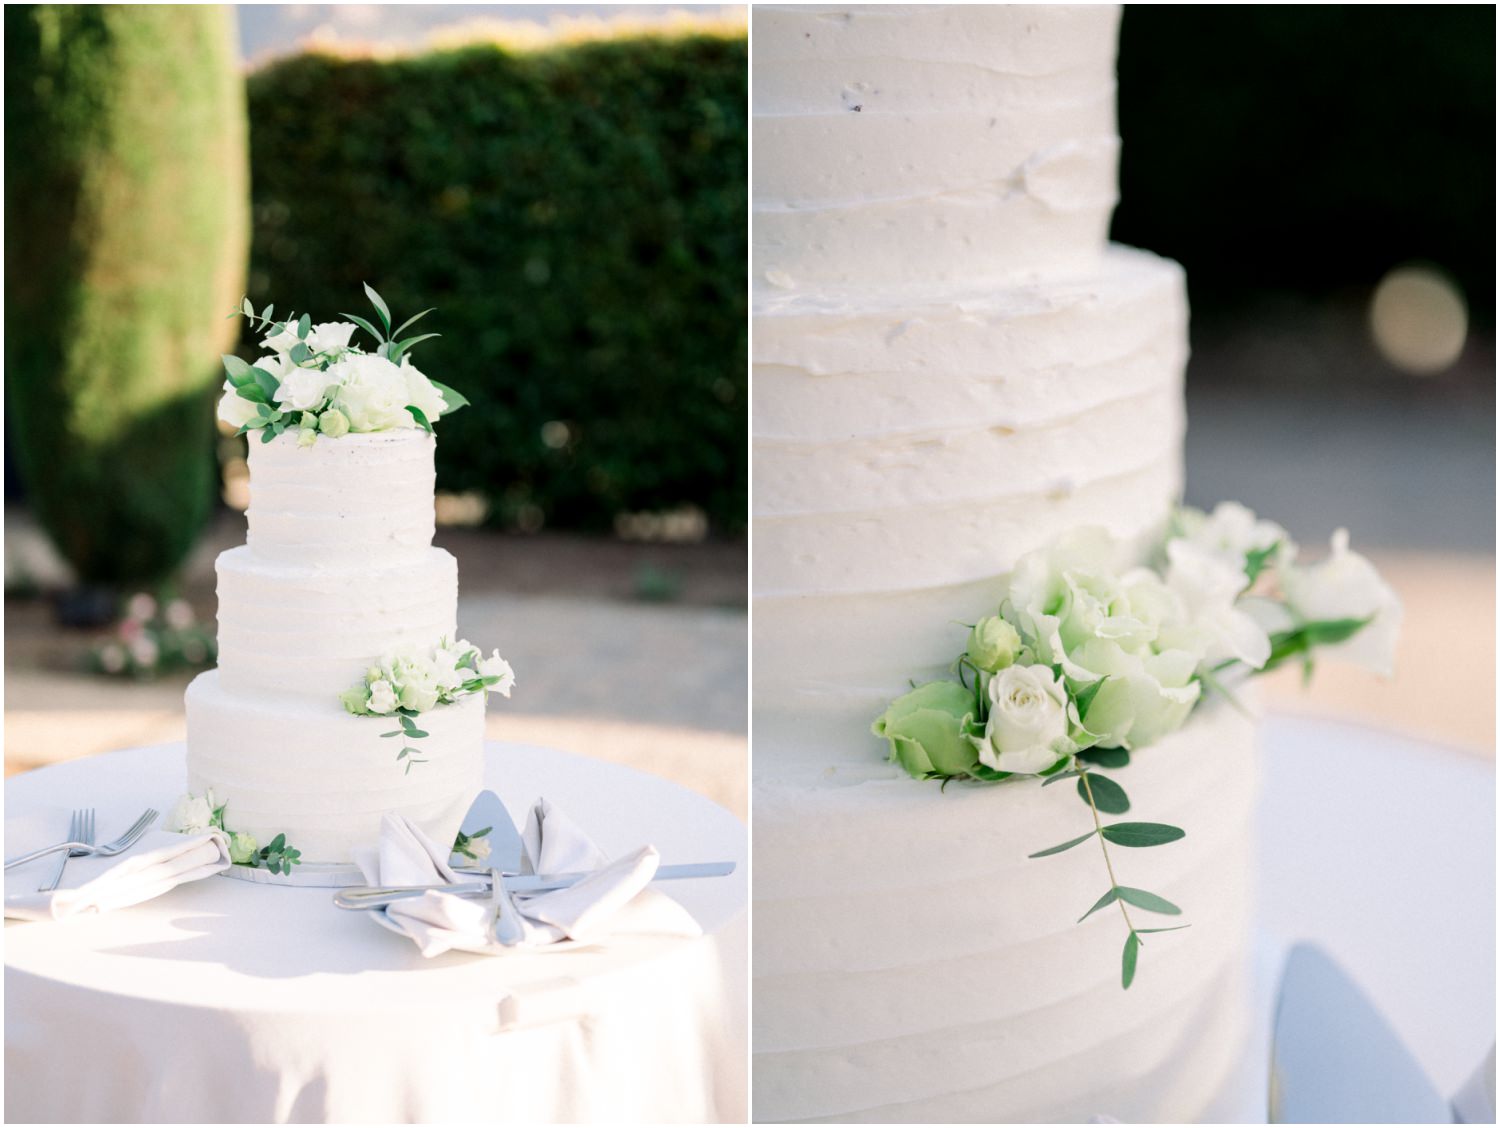 two photos of a wedding cake that is white with a few small white and green florals